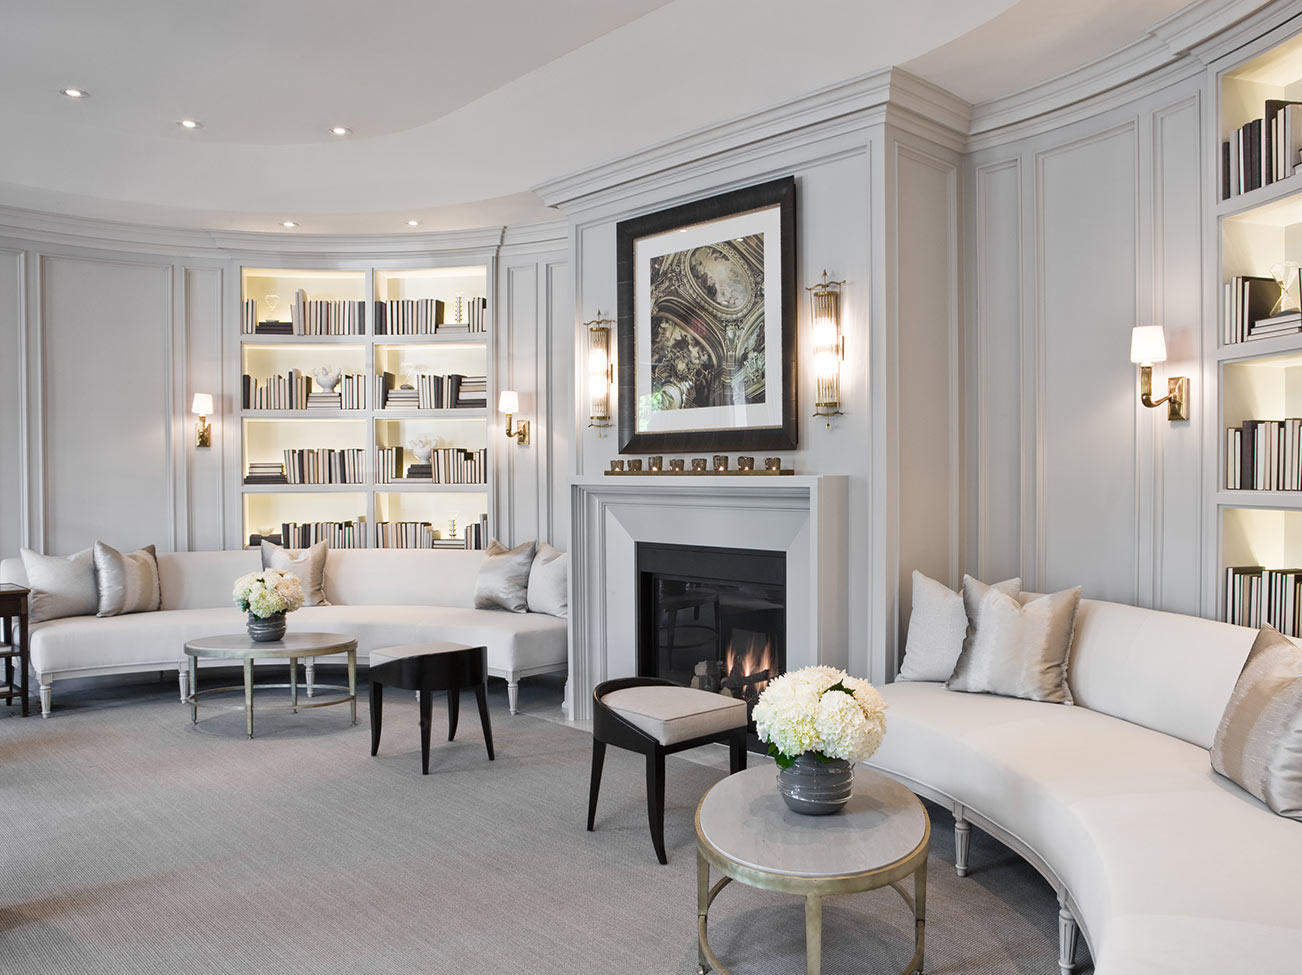 An elegant living room with wall sconces, two matching light gray sofas, and built-in bookcases on each side of a gray fireplace.